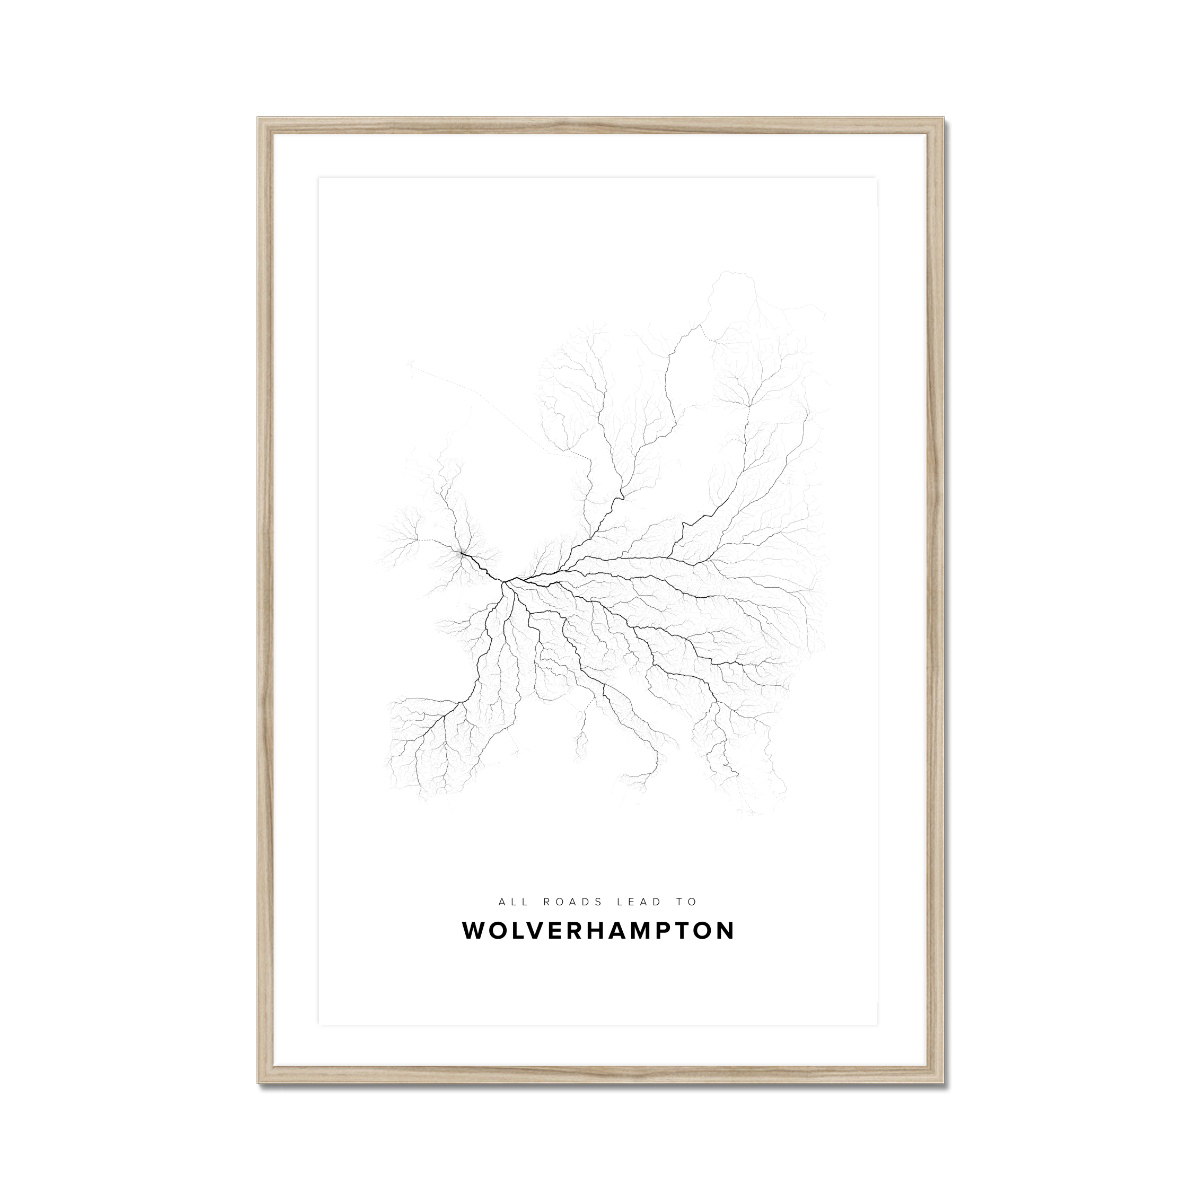 All roads lead to Wolverhampton (United Kingdom of Great Britain and Northern Ireland) Fine Art Map Print